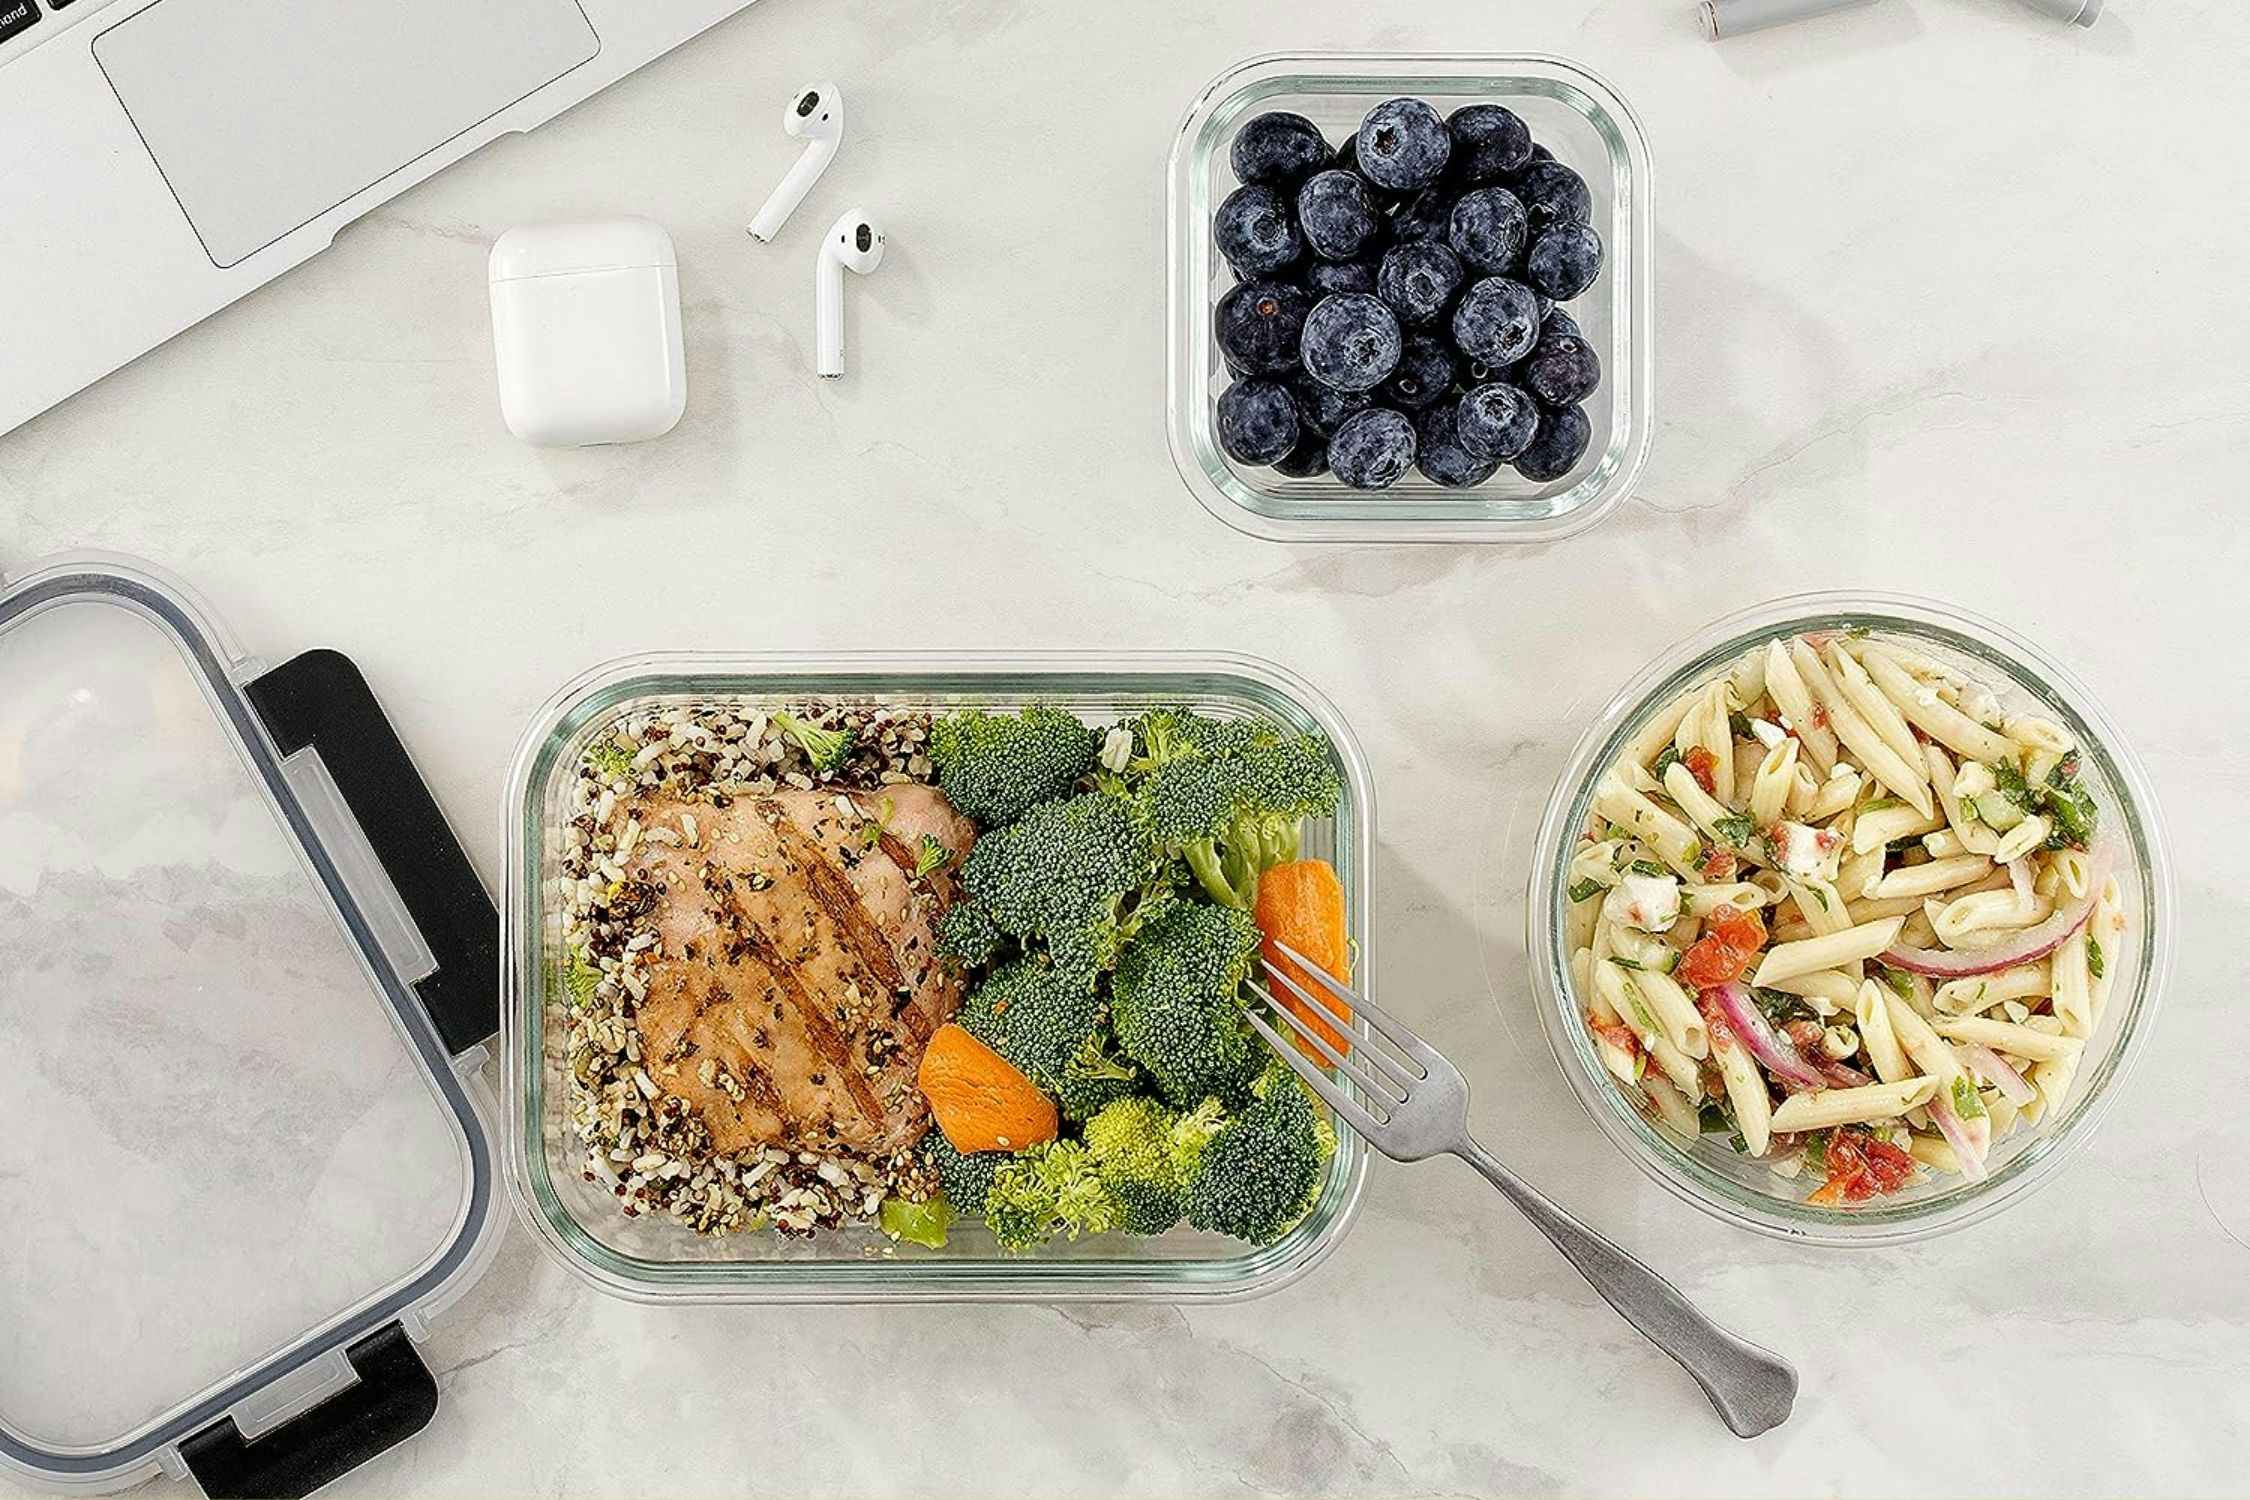 Get a 24-Piece Glass Food Storage Container Set for Just $30 on Amazon